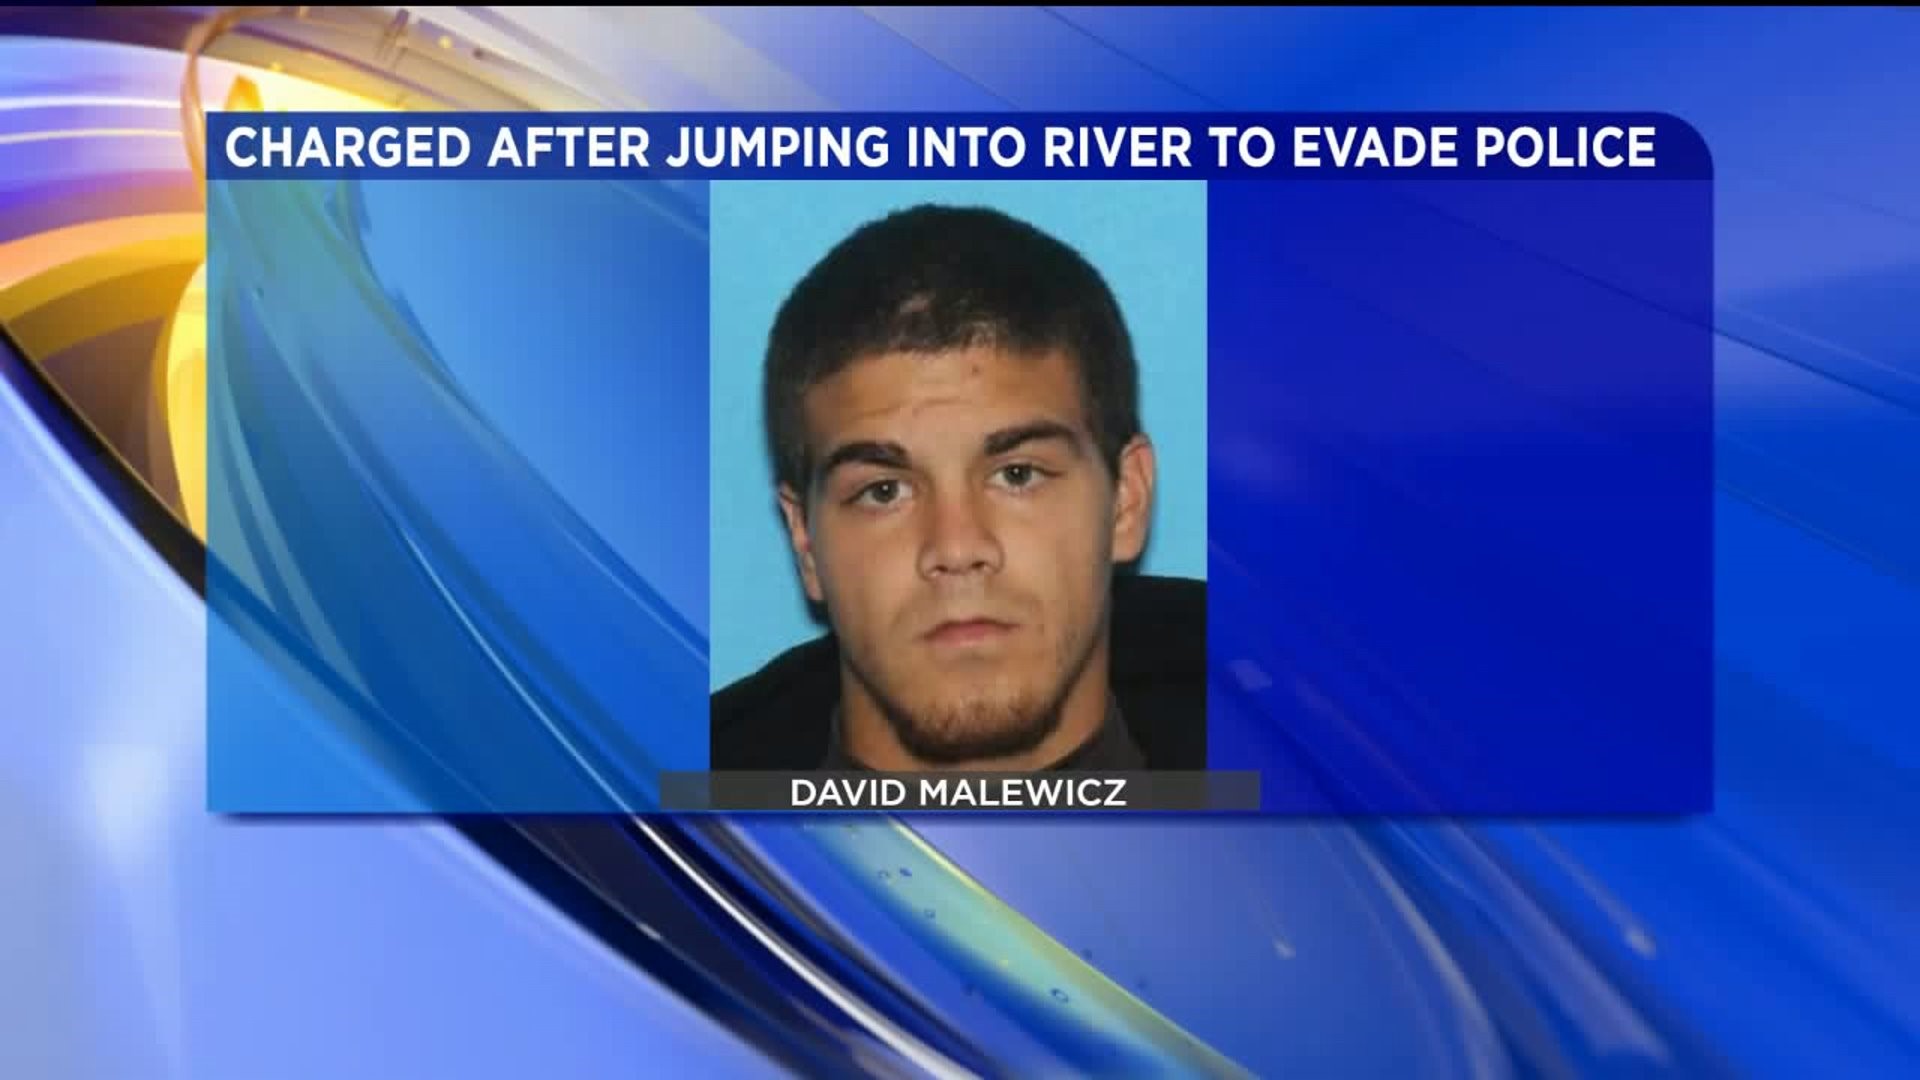 Police: Man Jumped into River to Avoid Questioning